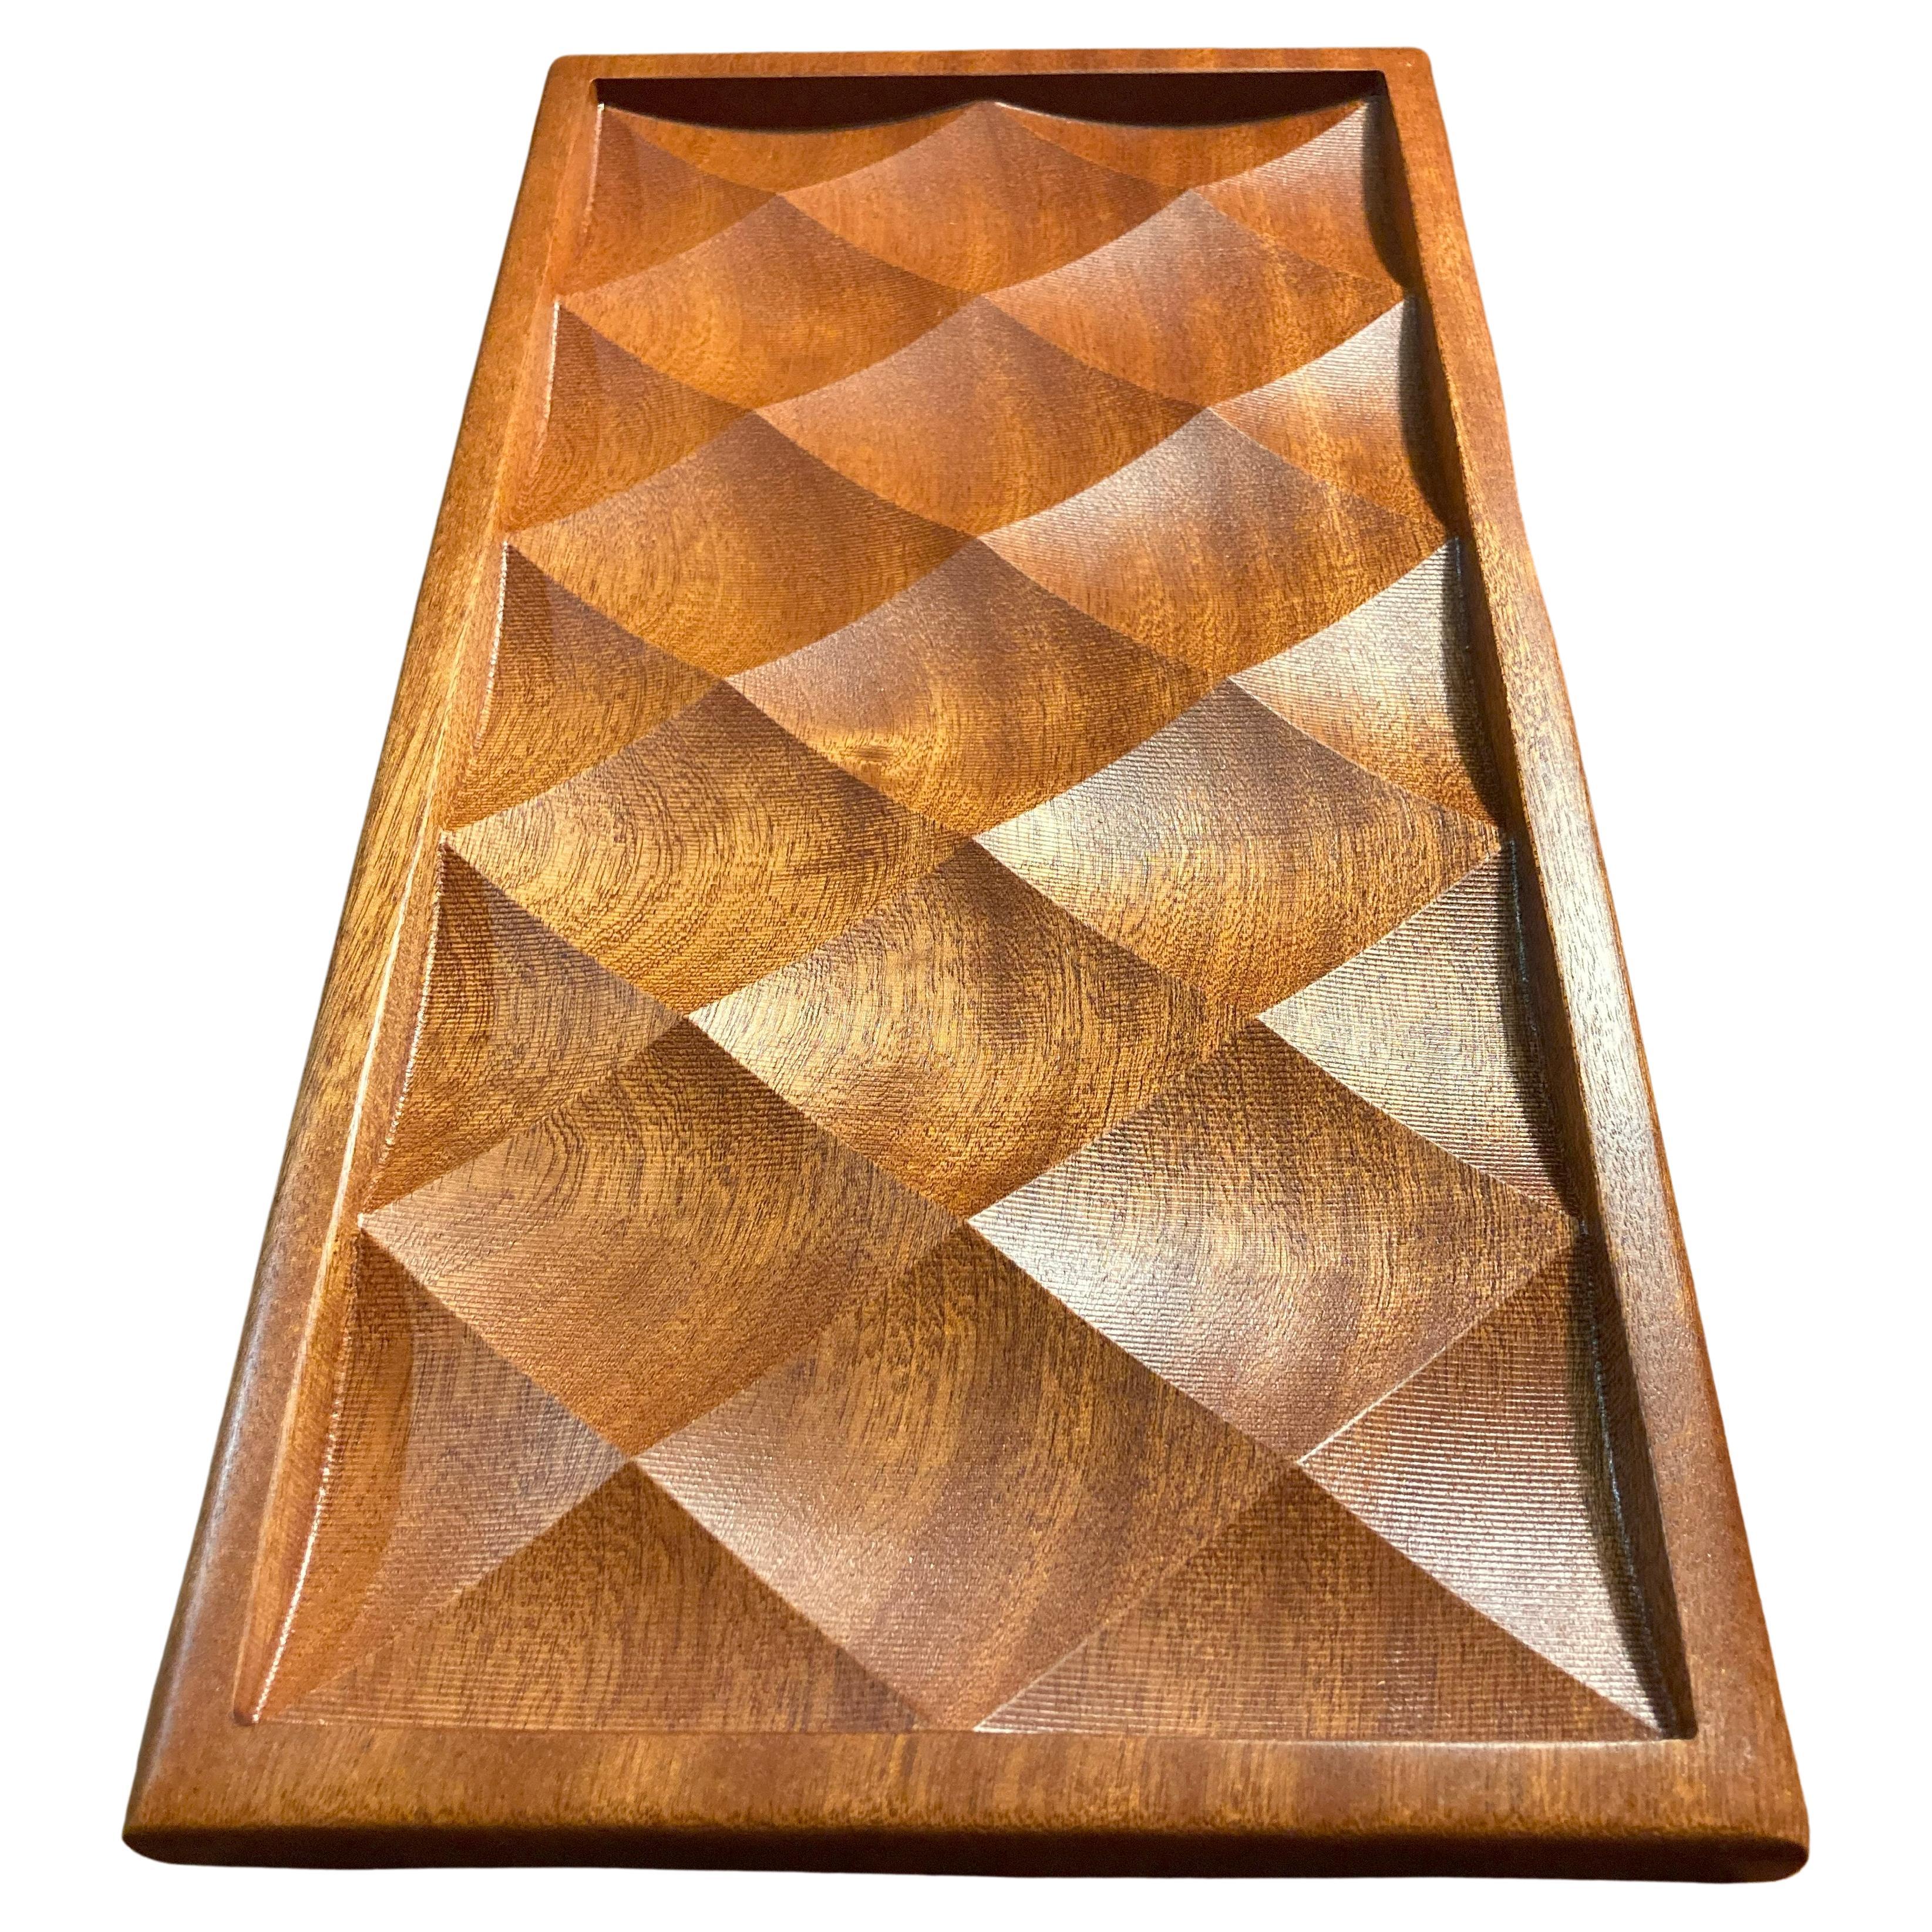 Wood valet tray vanity tray catchall tray home office dresser kitchen in stock For Sale